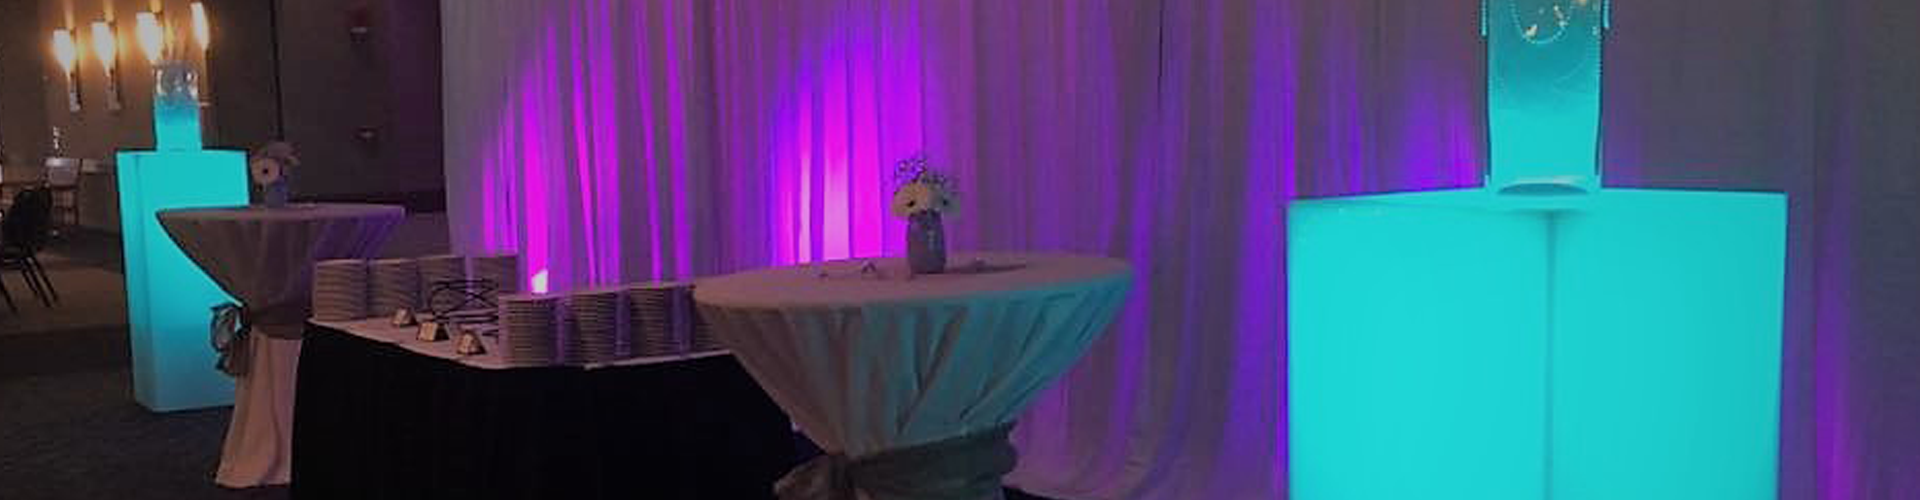 Lighted Decor for Proms and Special Events